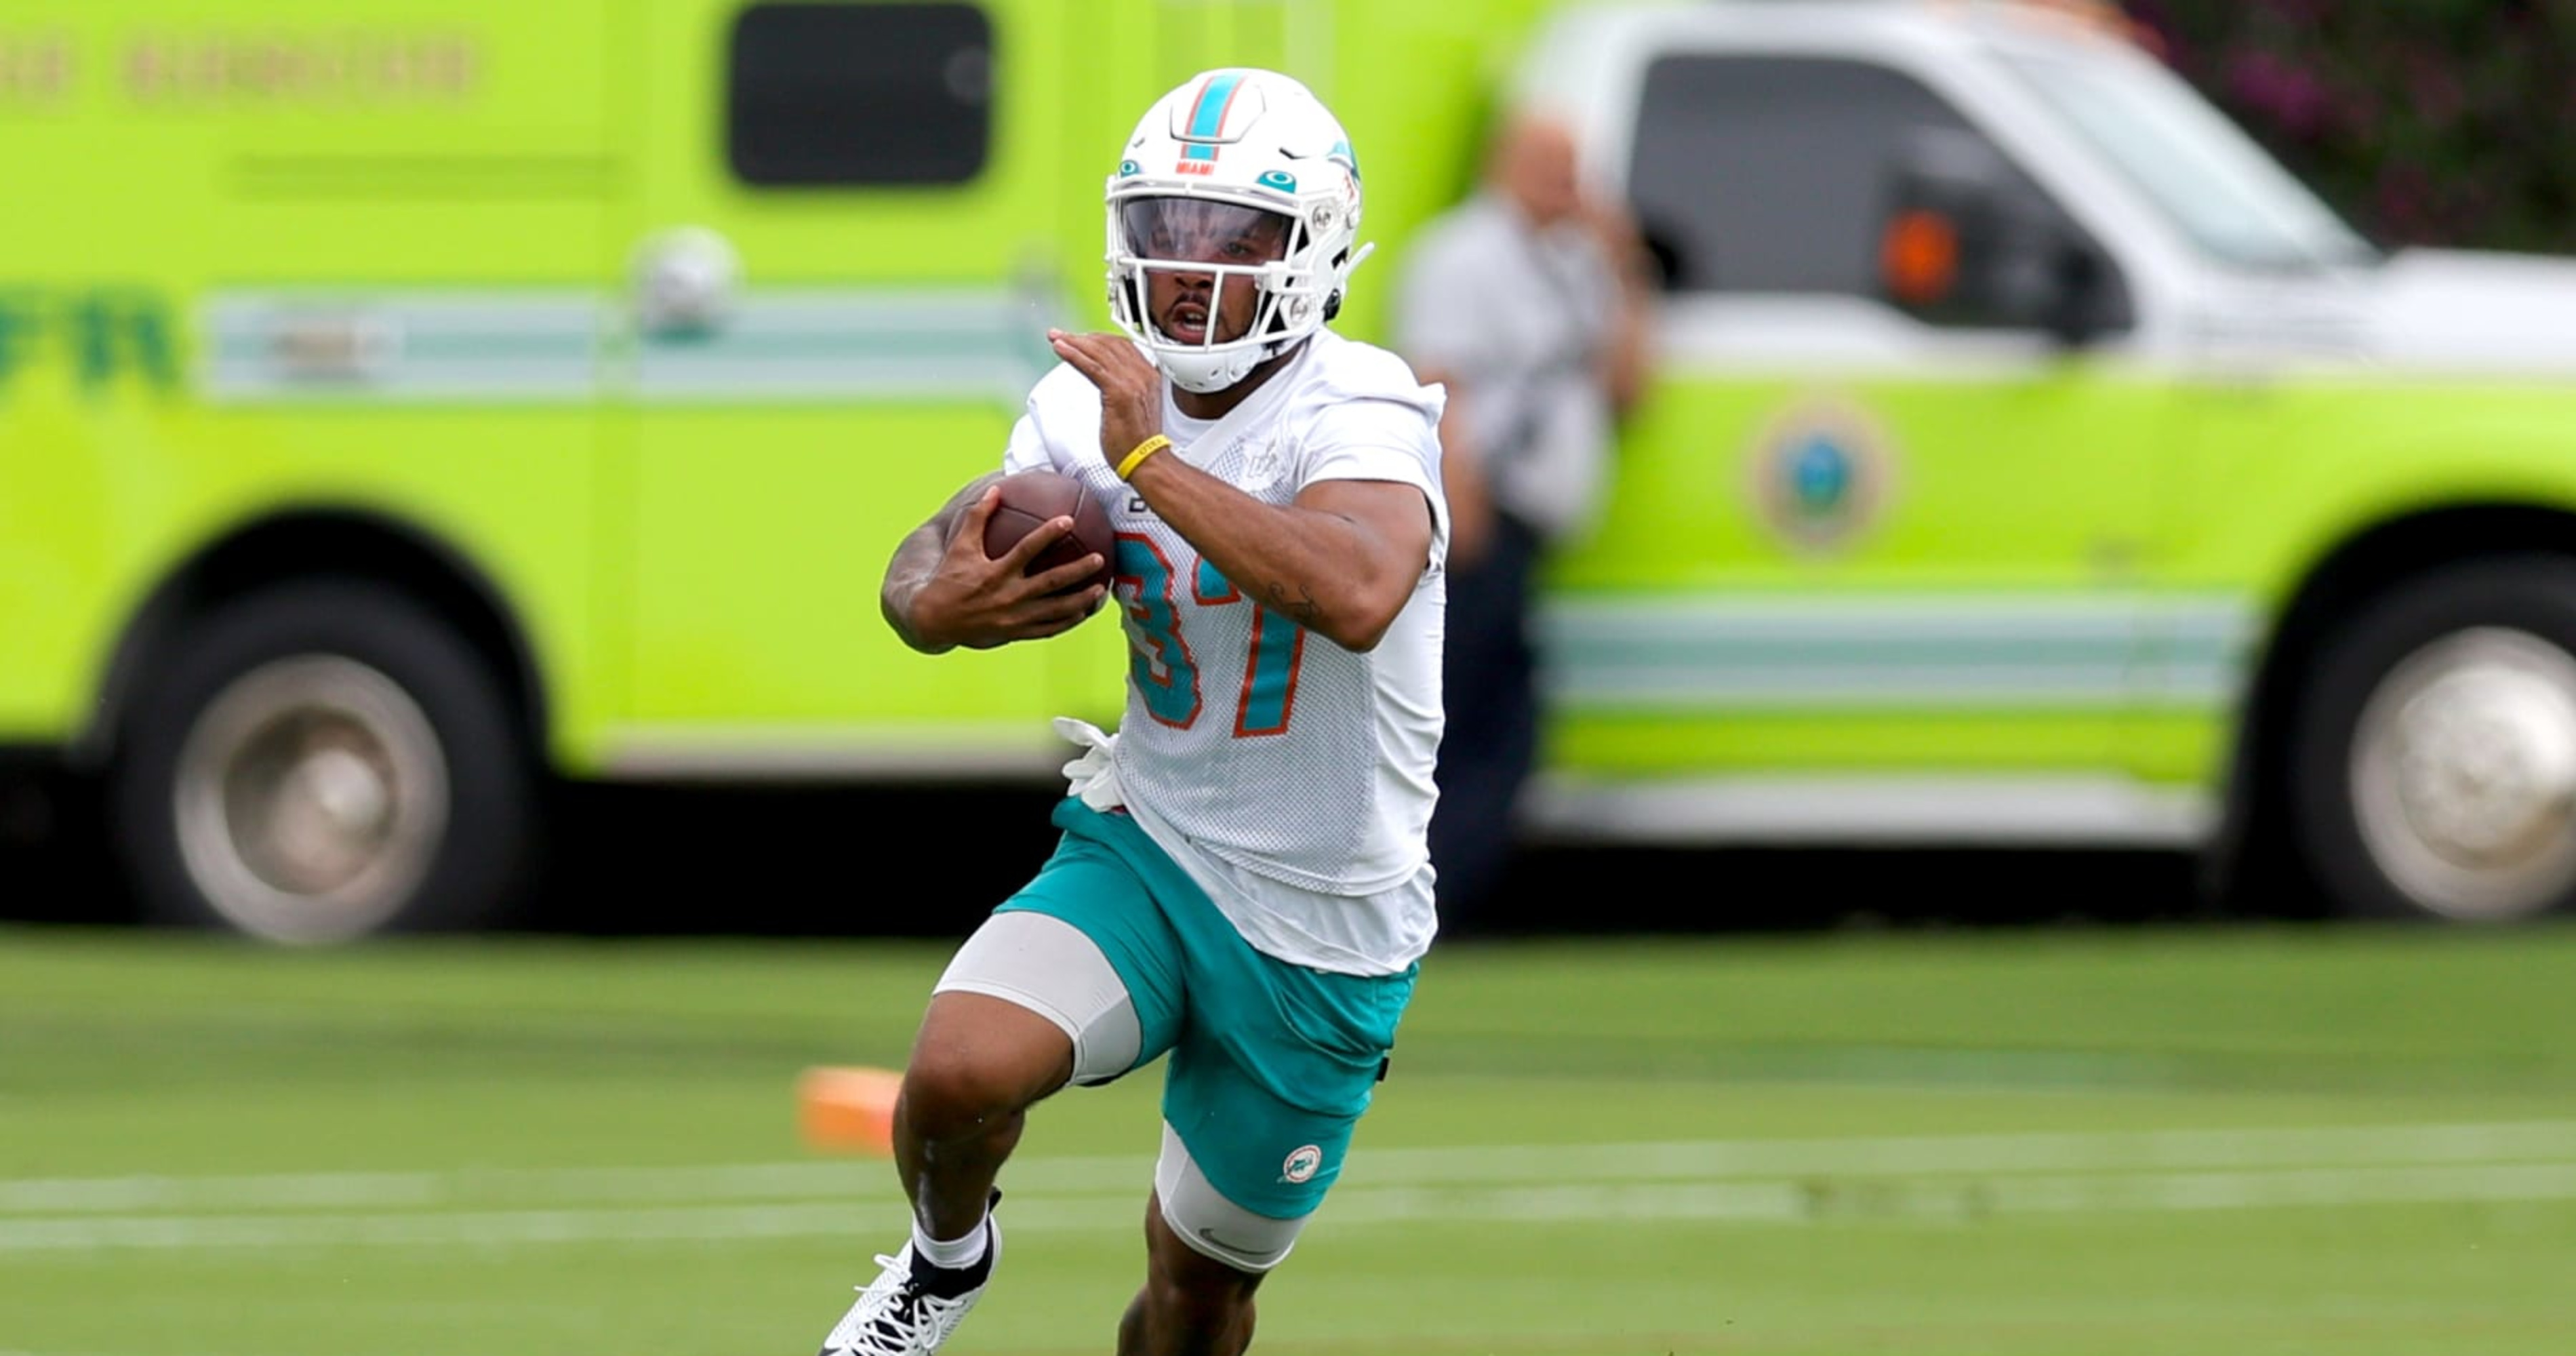 Miami Dolphins News, Rumors, Depth Chart, Schedule, Scores, Stats, and More